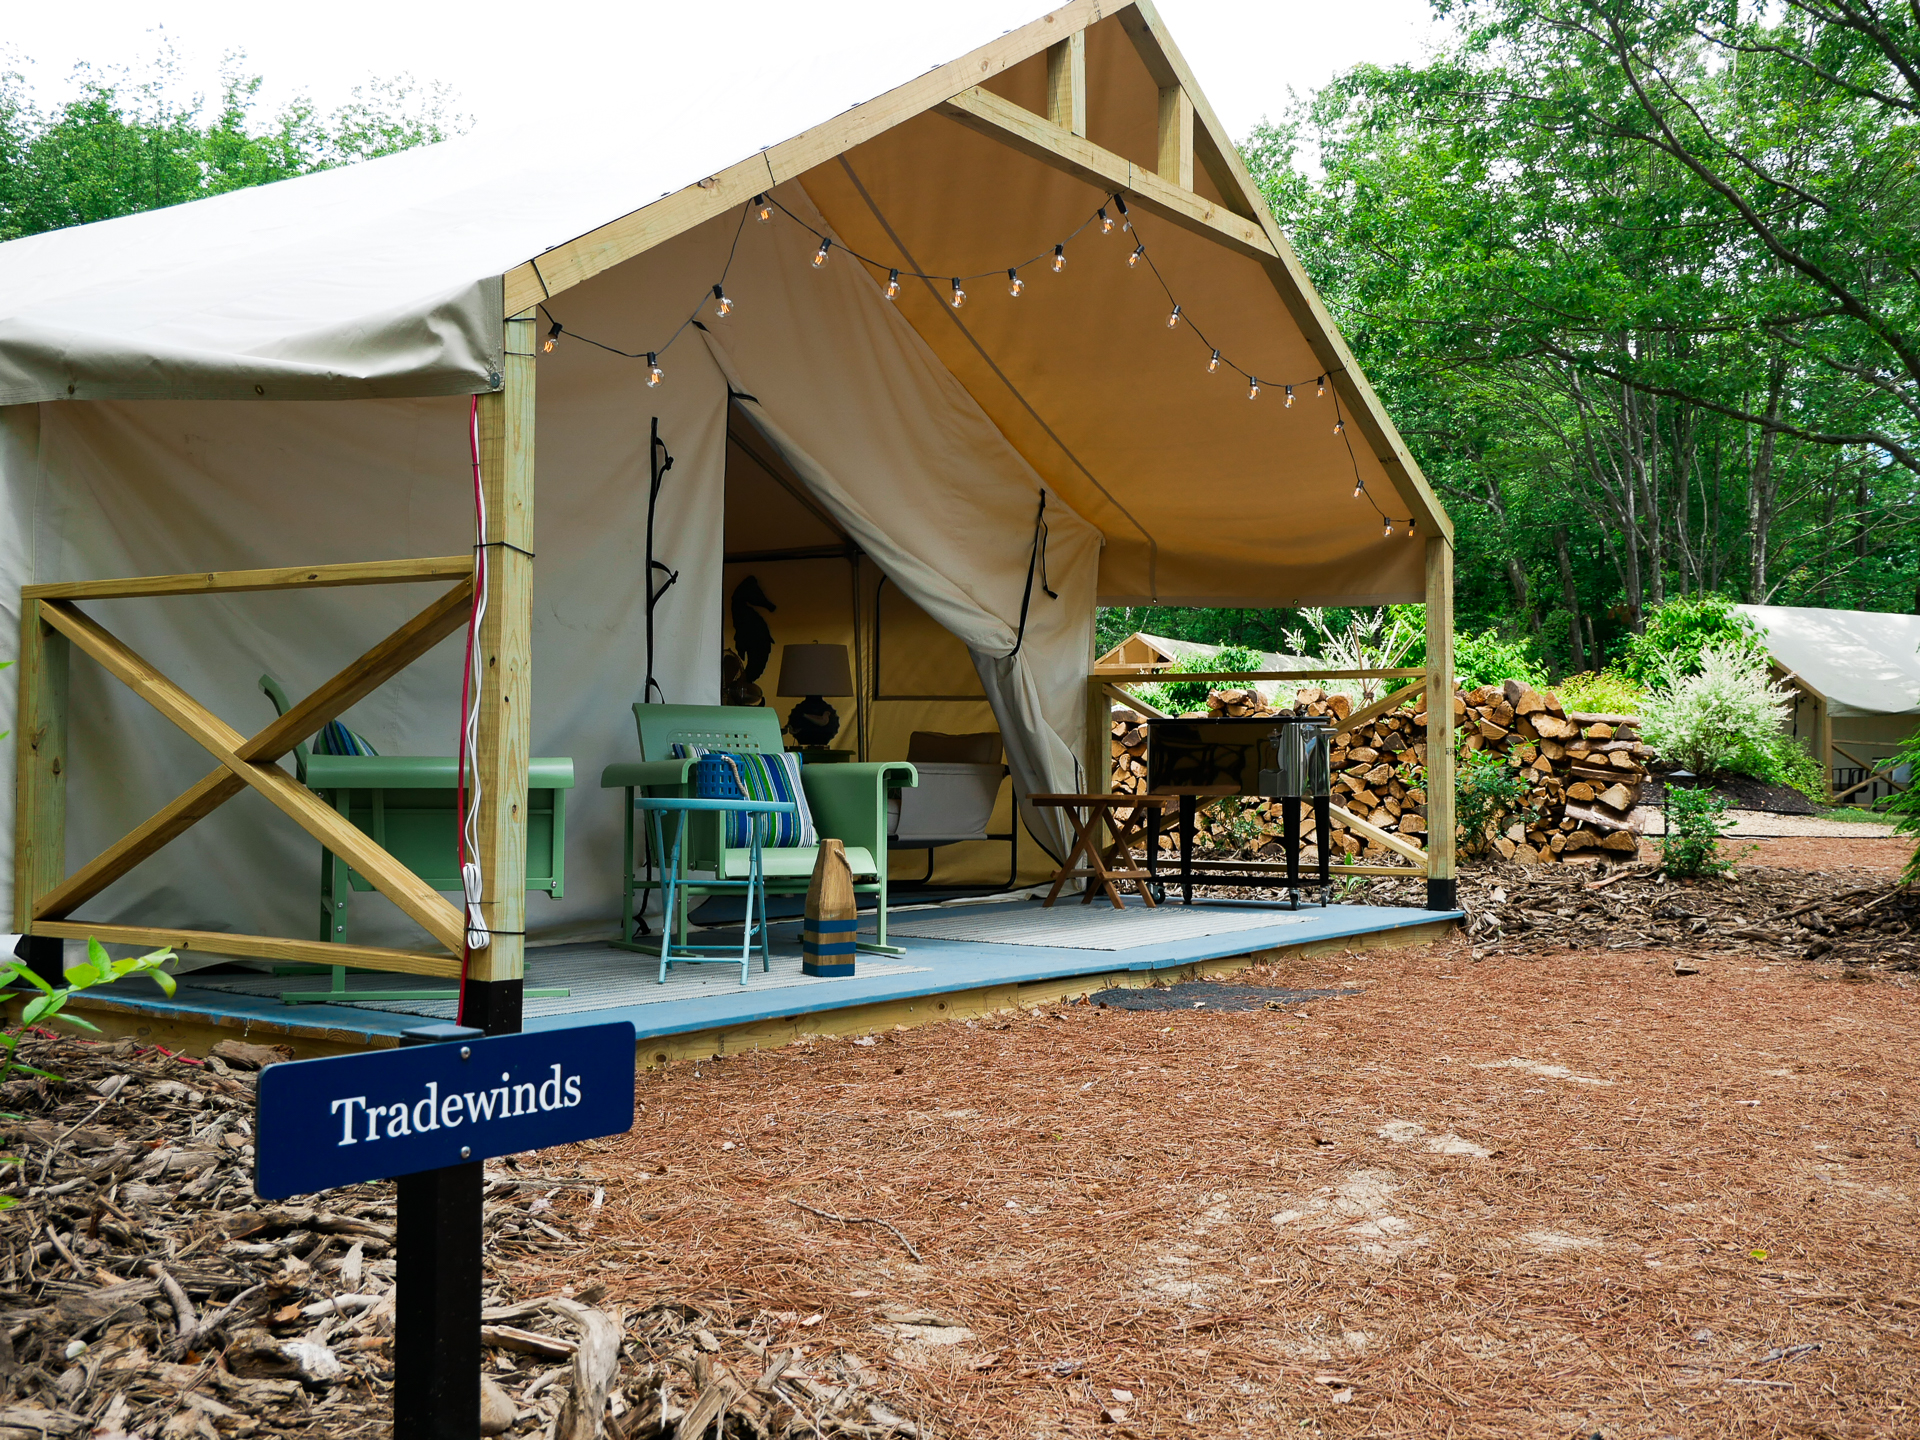 The exterior front porch of a safari glamping tent, with a small sign that reads "Tradewinds"